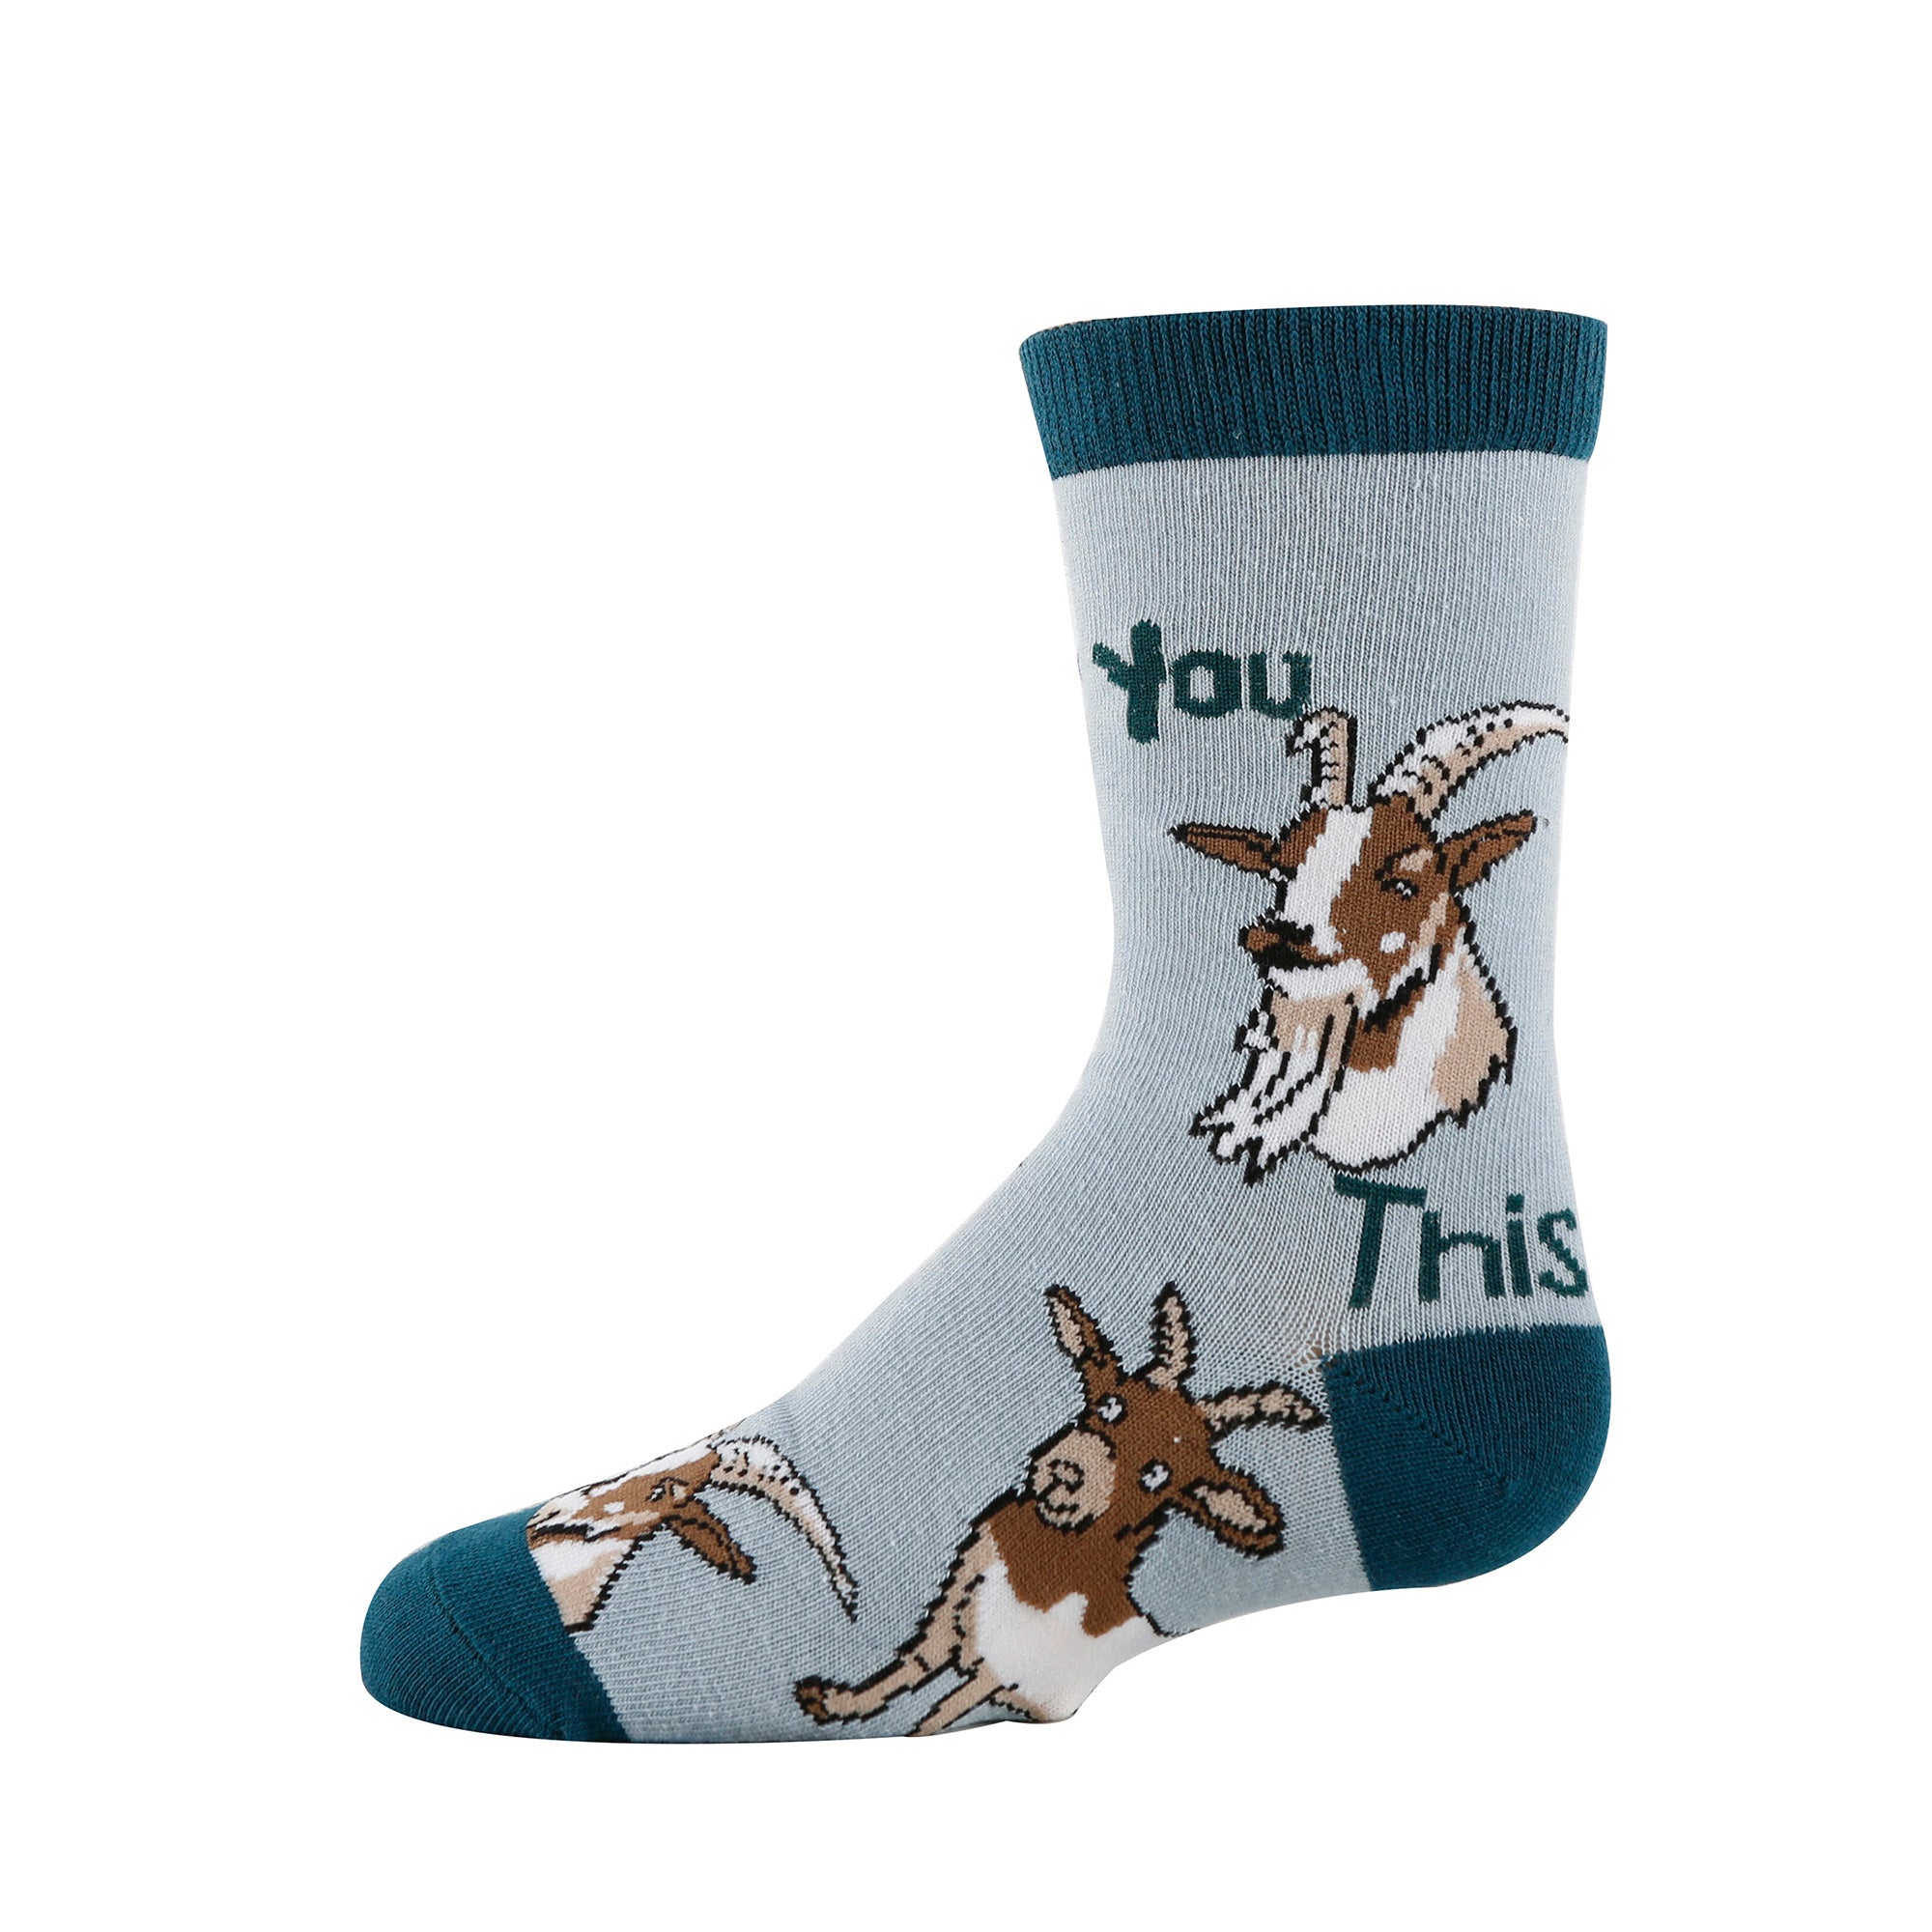 You Goat This Socks